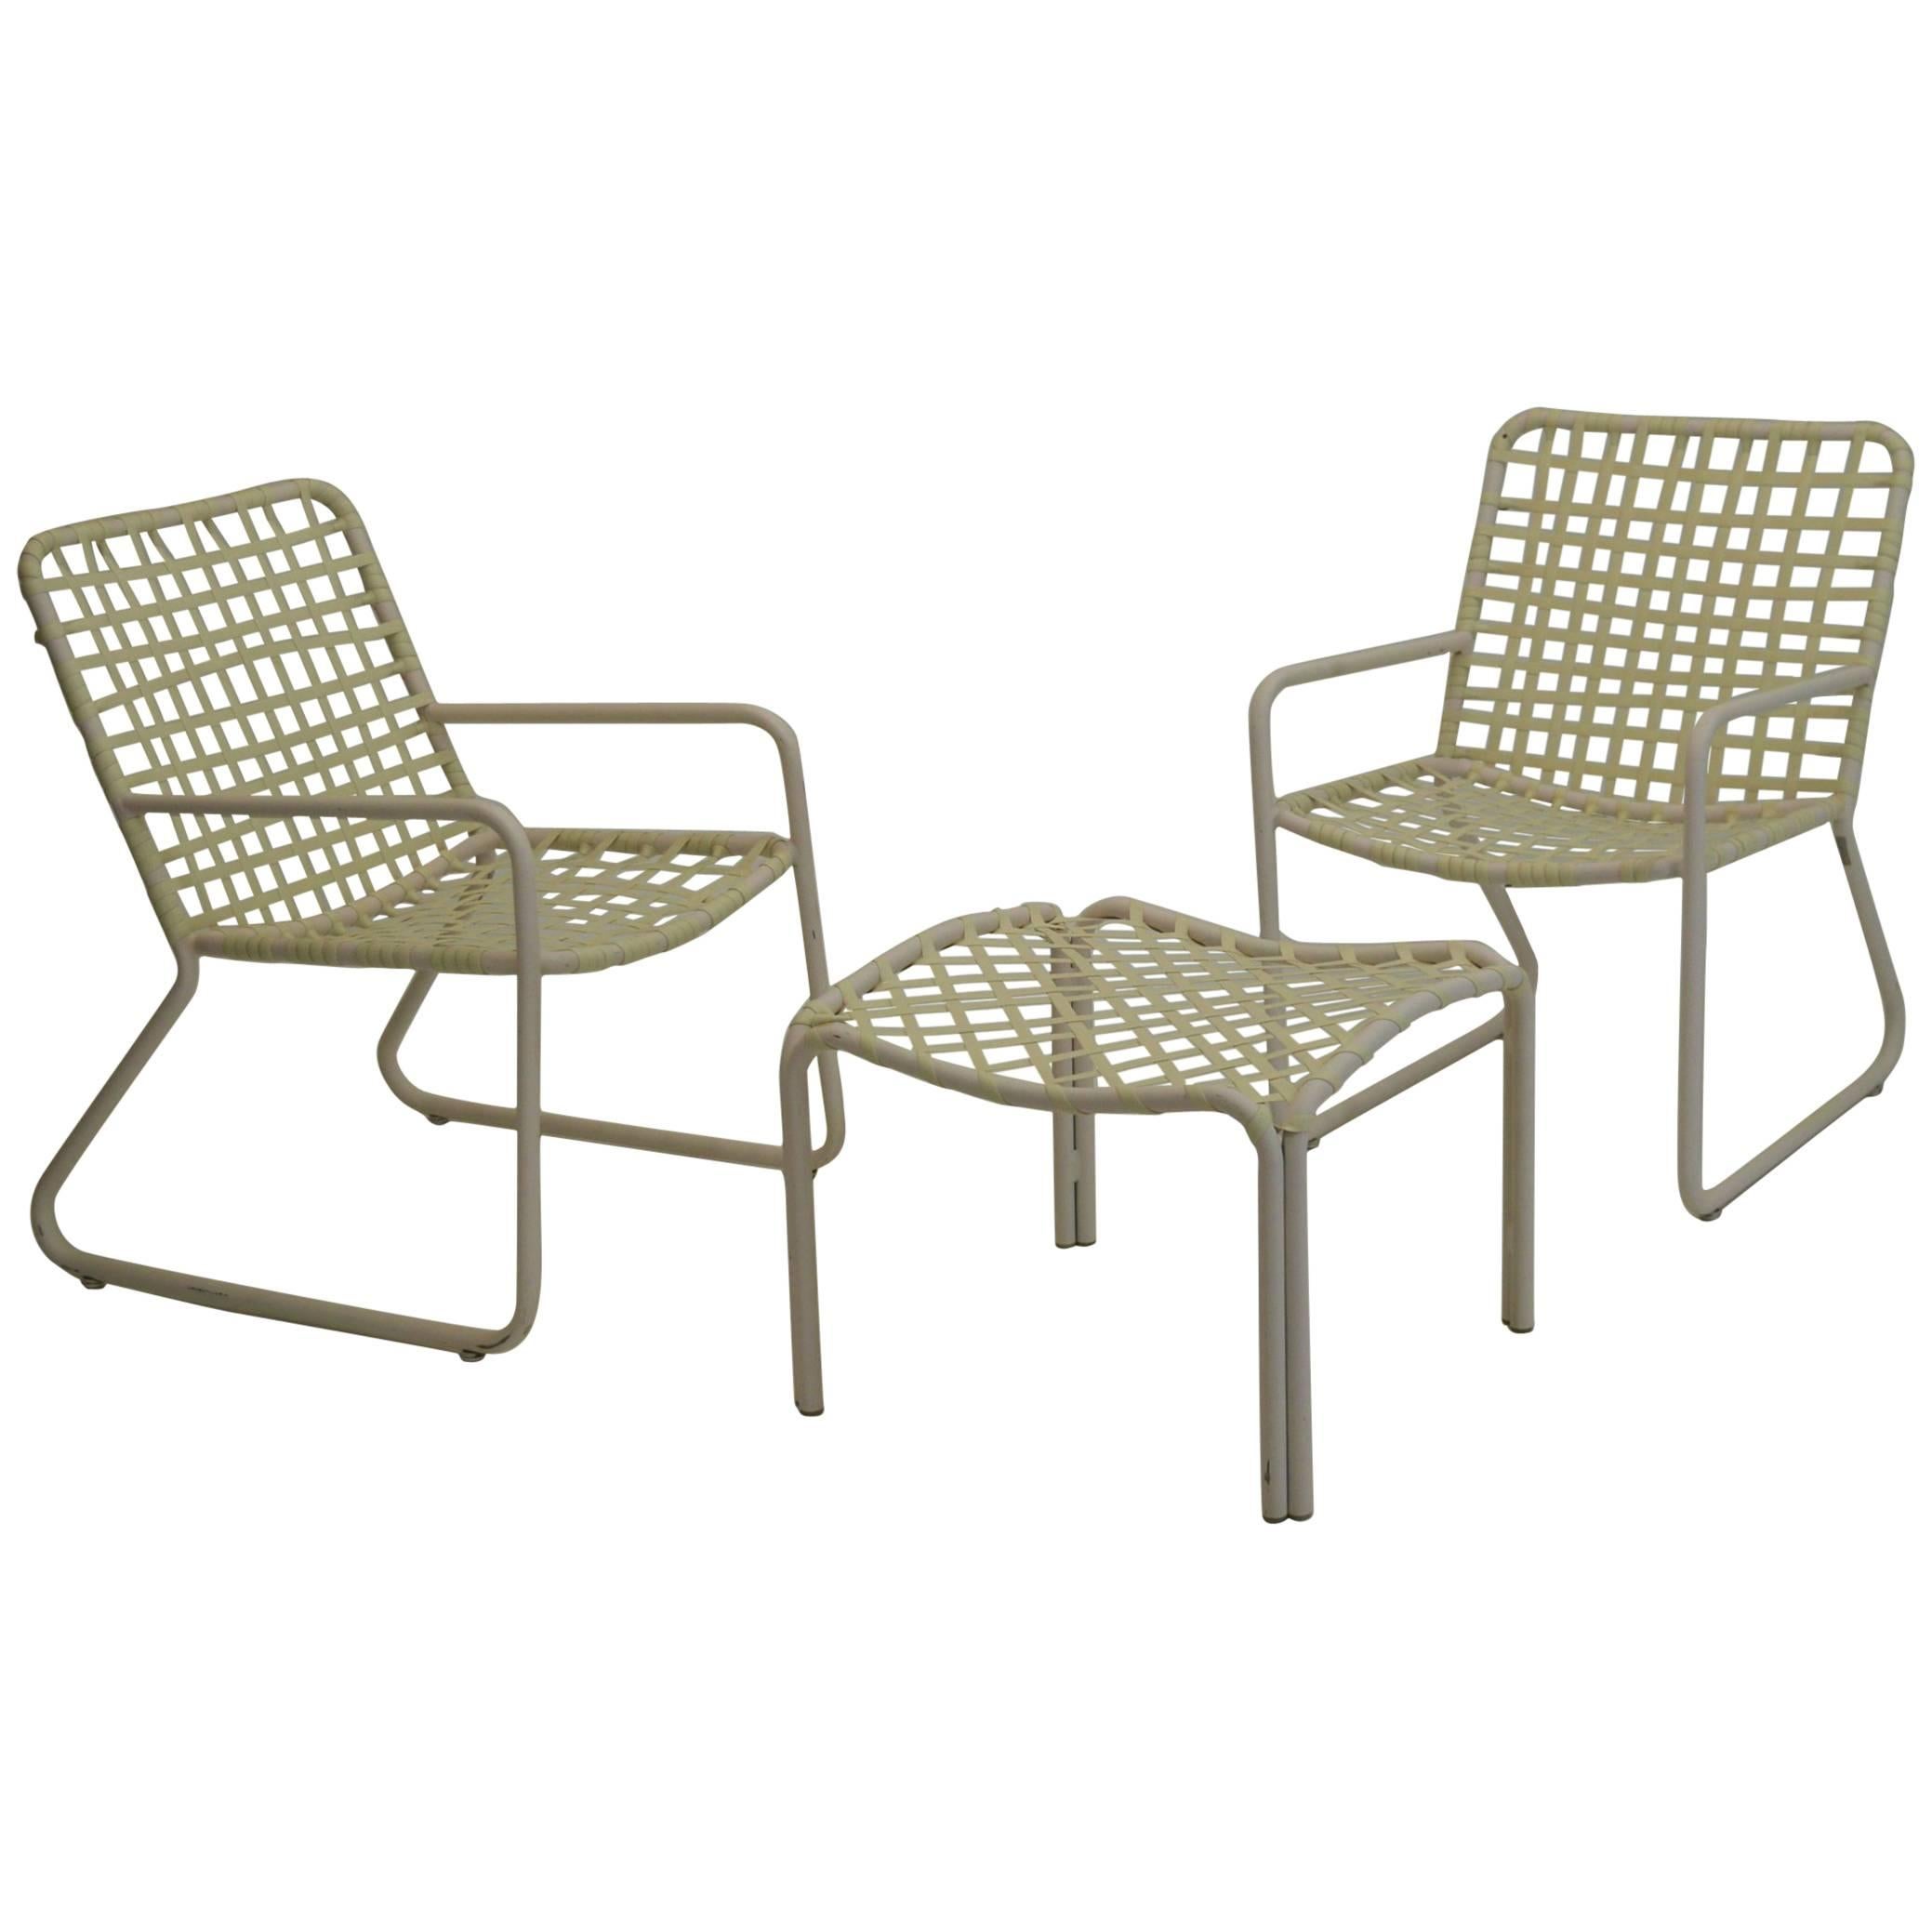 Brown Jordan Patio Set of Two Chairs and Ottoman